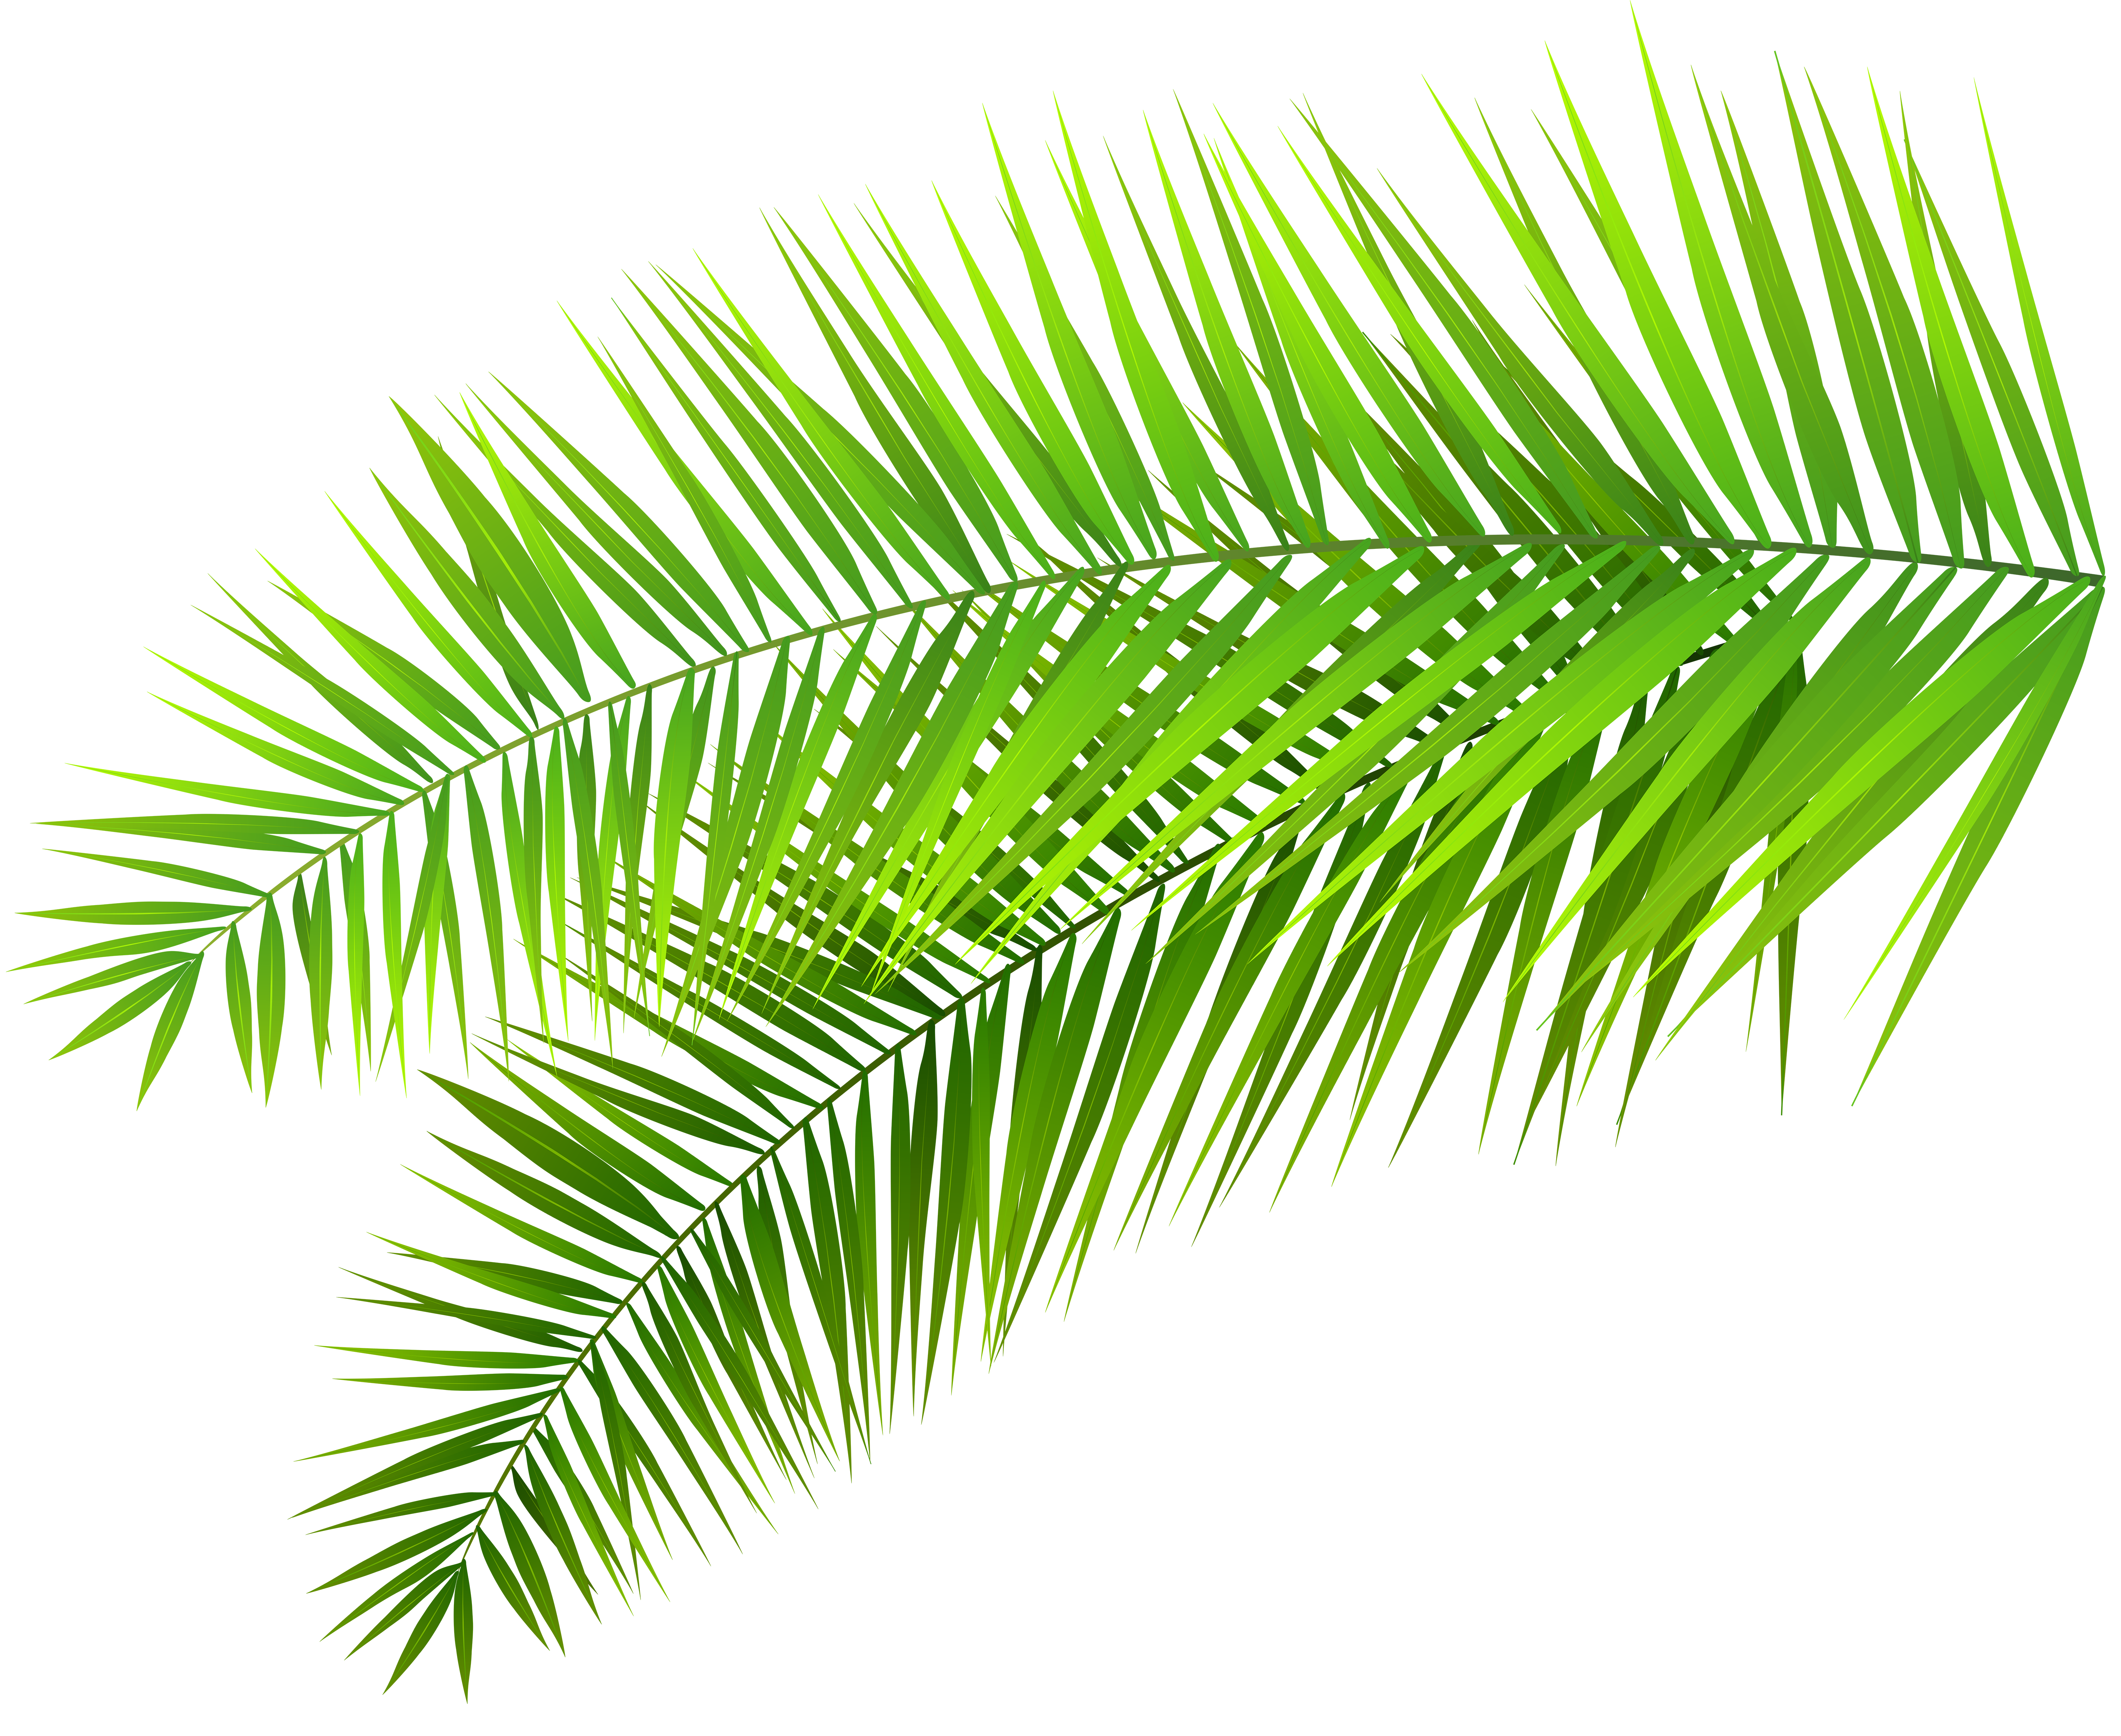 Palm Leaves Decoration PNG Clip Art Image | Gallery Yopriceville ...